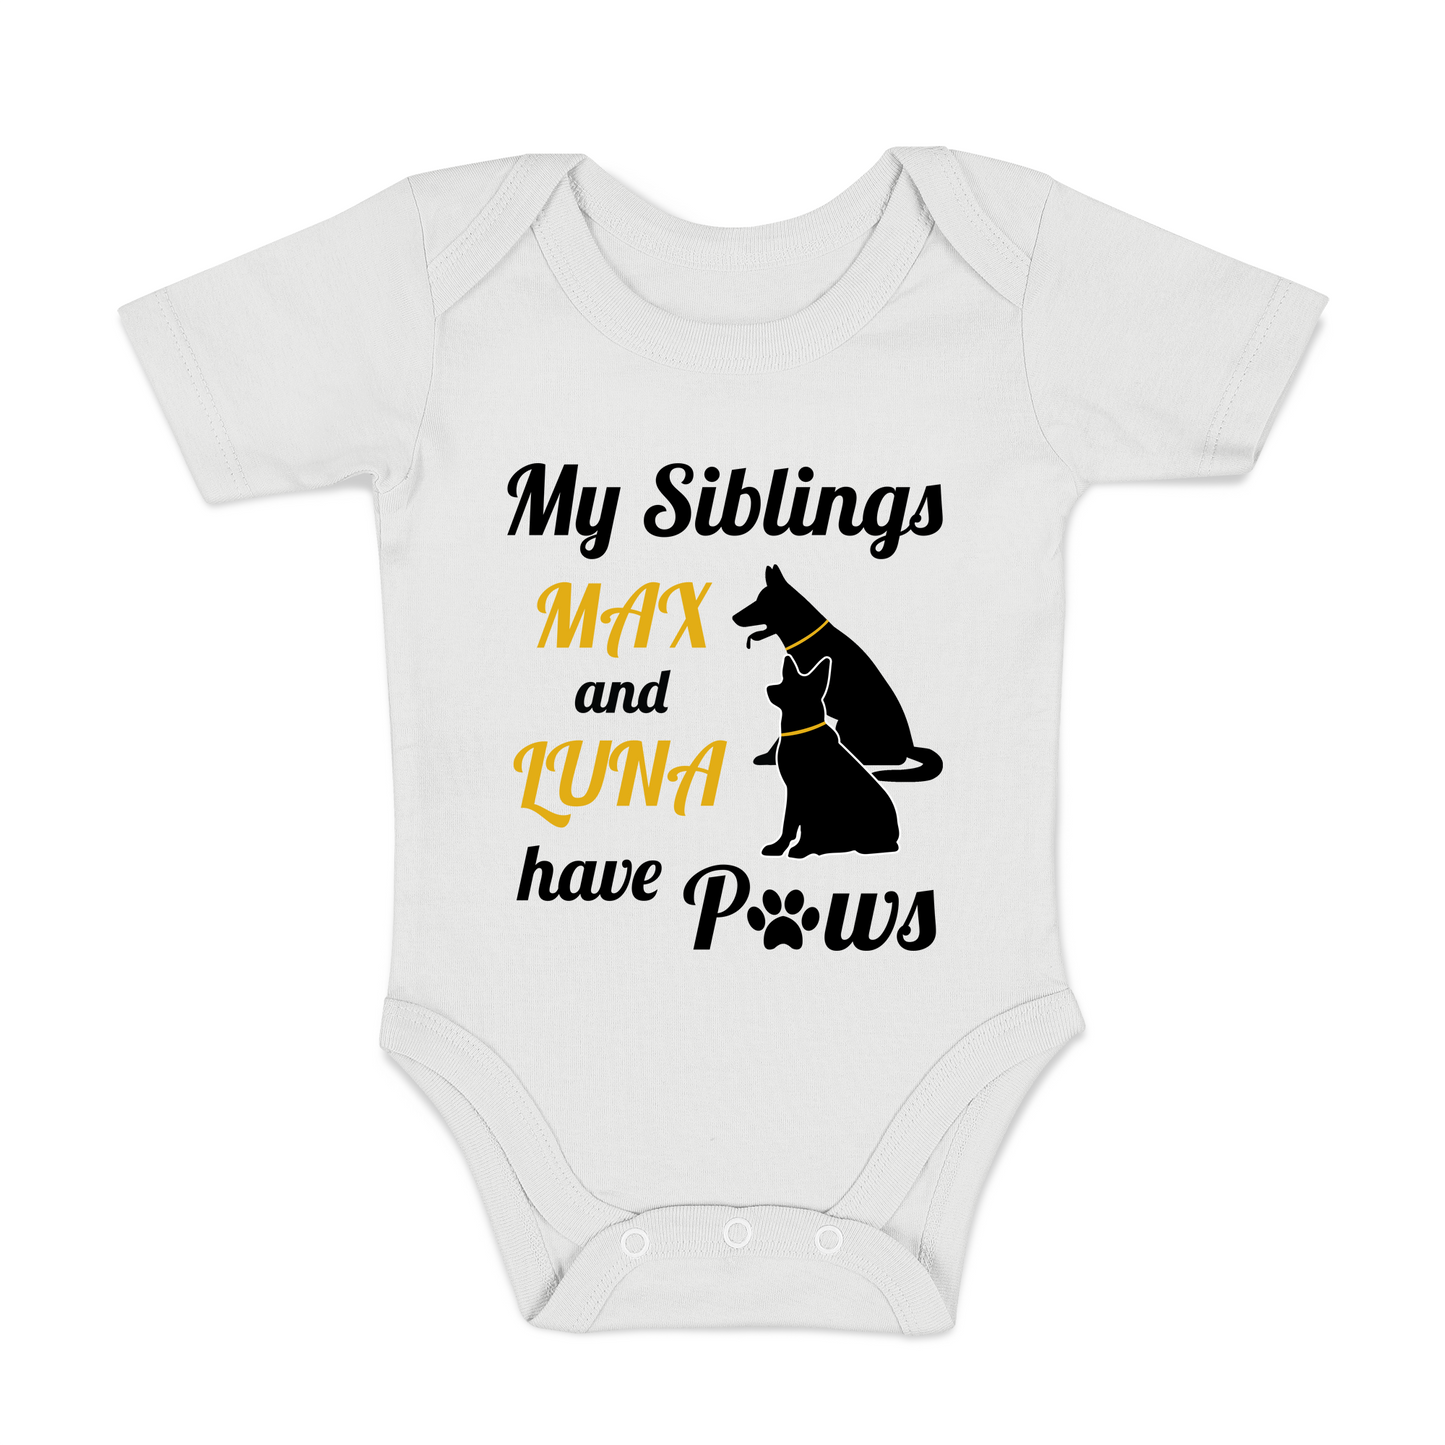 [Personalized] Pair of DOGS I My Siblings have Paws I Organic Baby Bodysuit